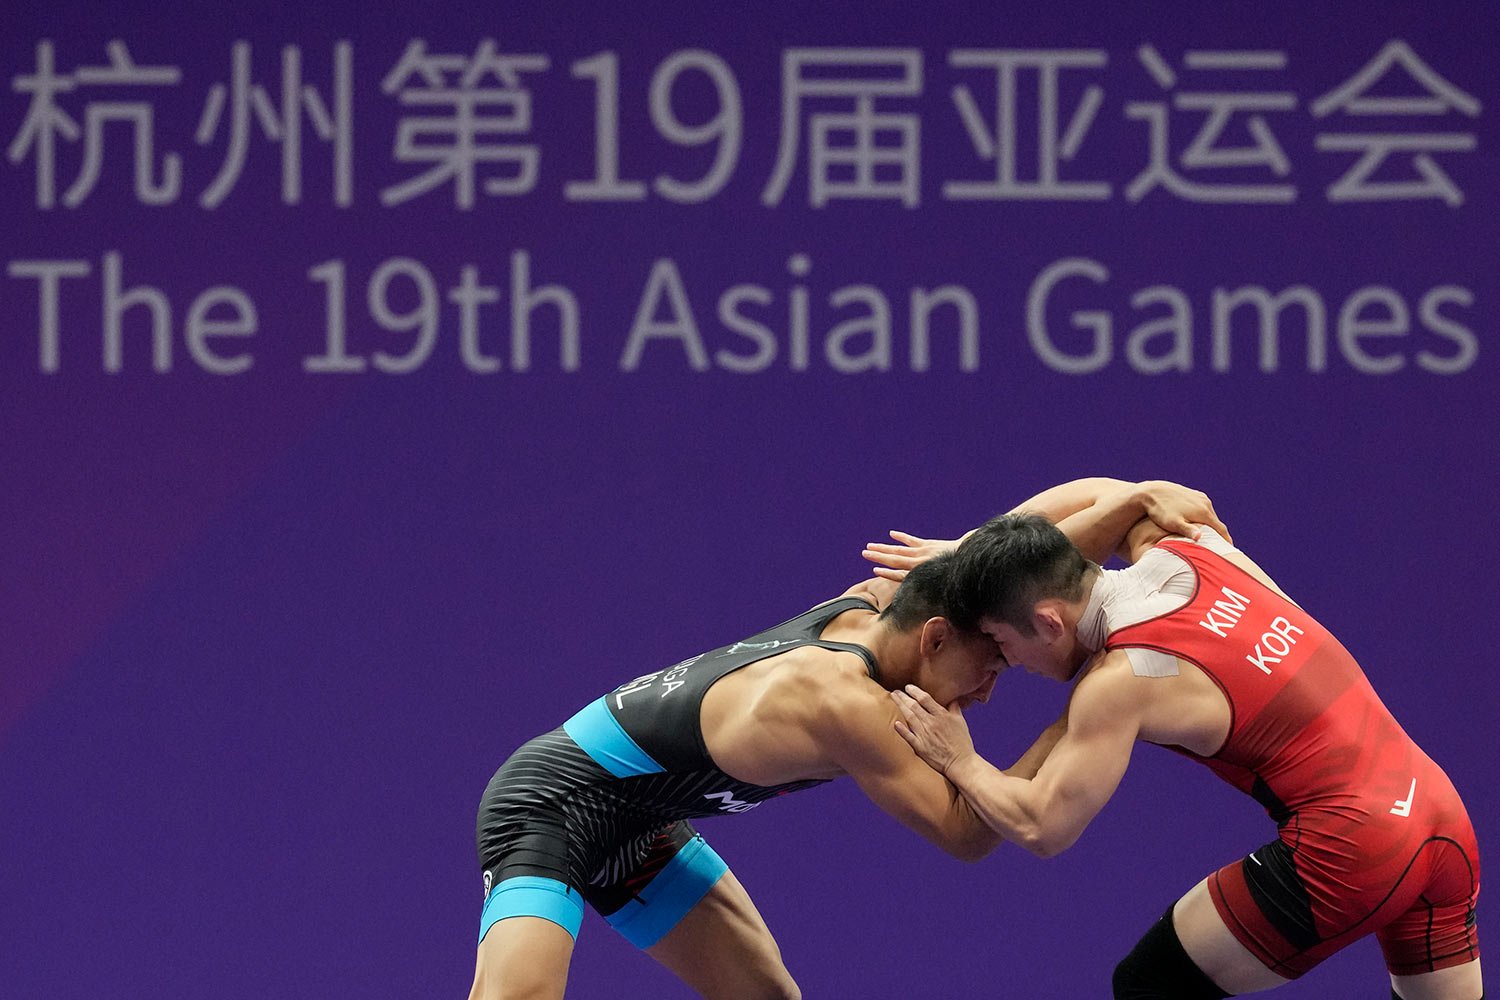  Korea's Kim Changsu, right, and Mongolia's Tulga Tumur-Ochir compete during their Men's Freestyle 65Kg wrestling quarterfinal at the 19th Asian Games in Hangzhou, China, Friday, Oct. 6, 2023. (AP Photo/Aaron Favila) 